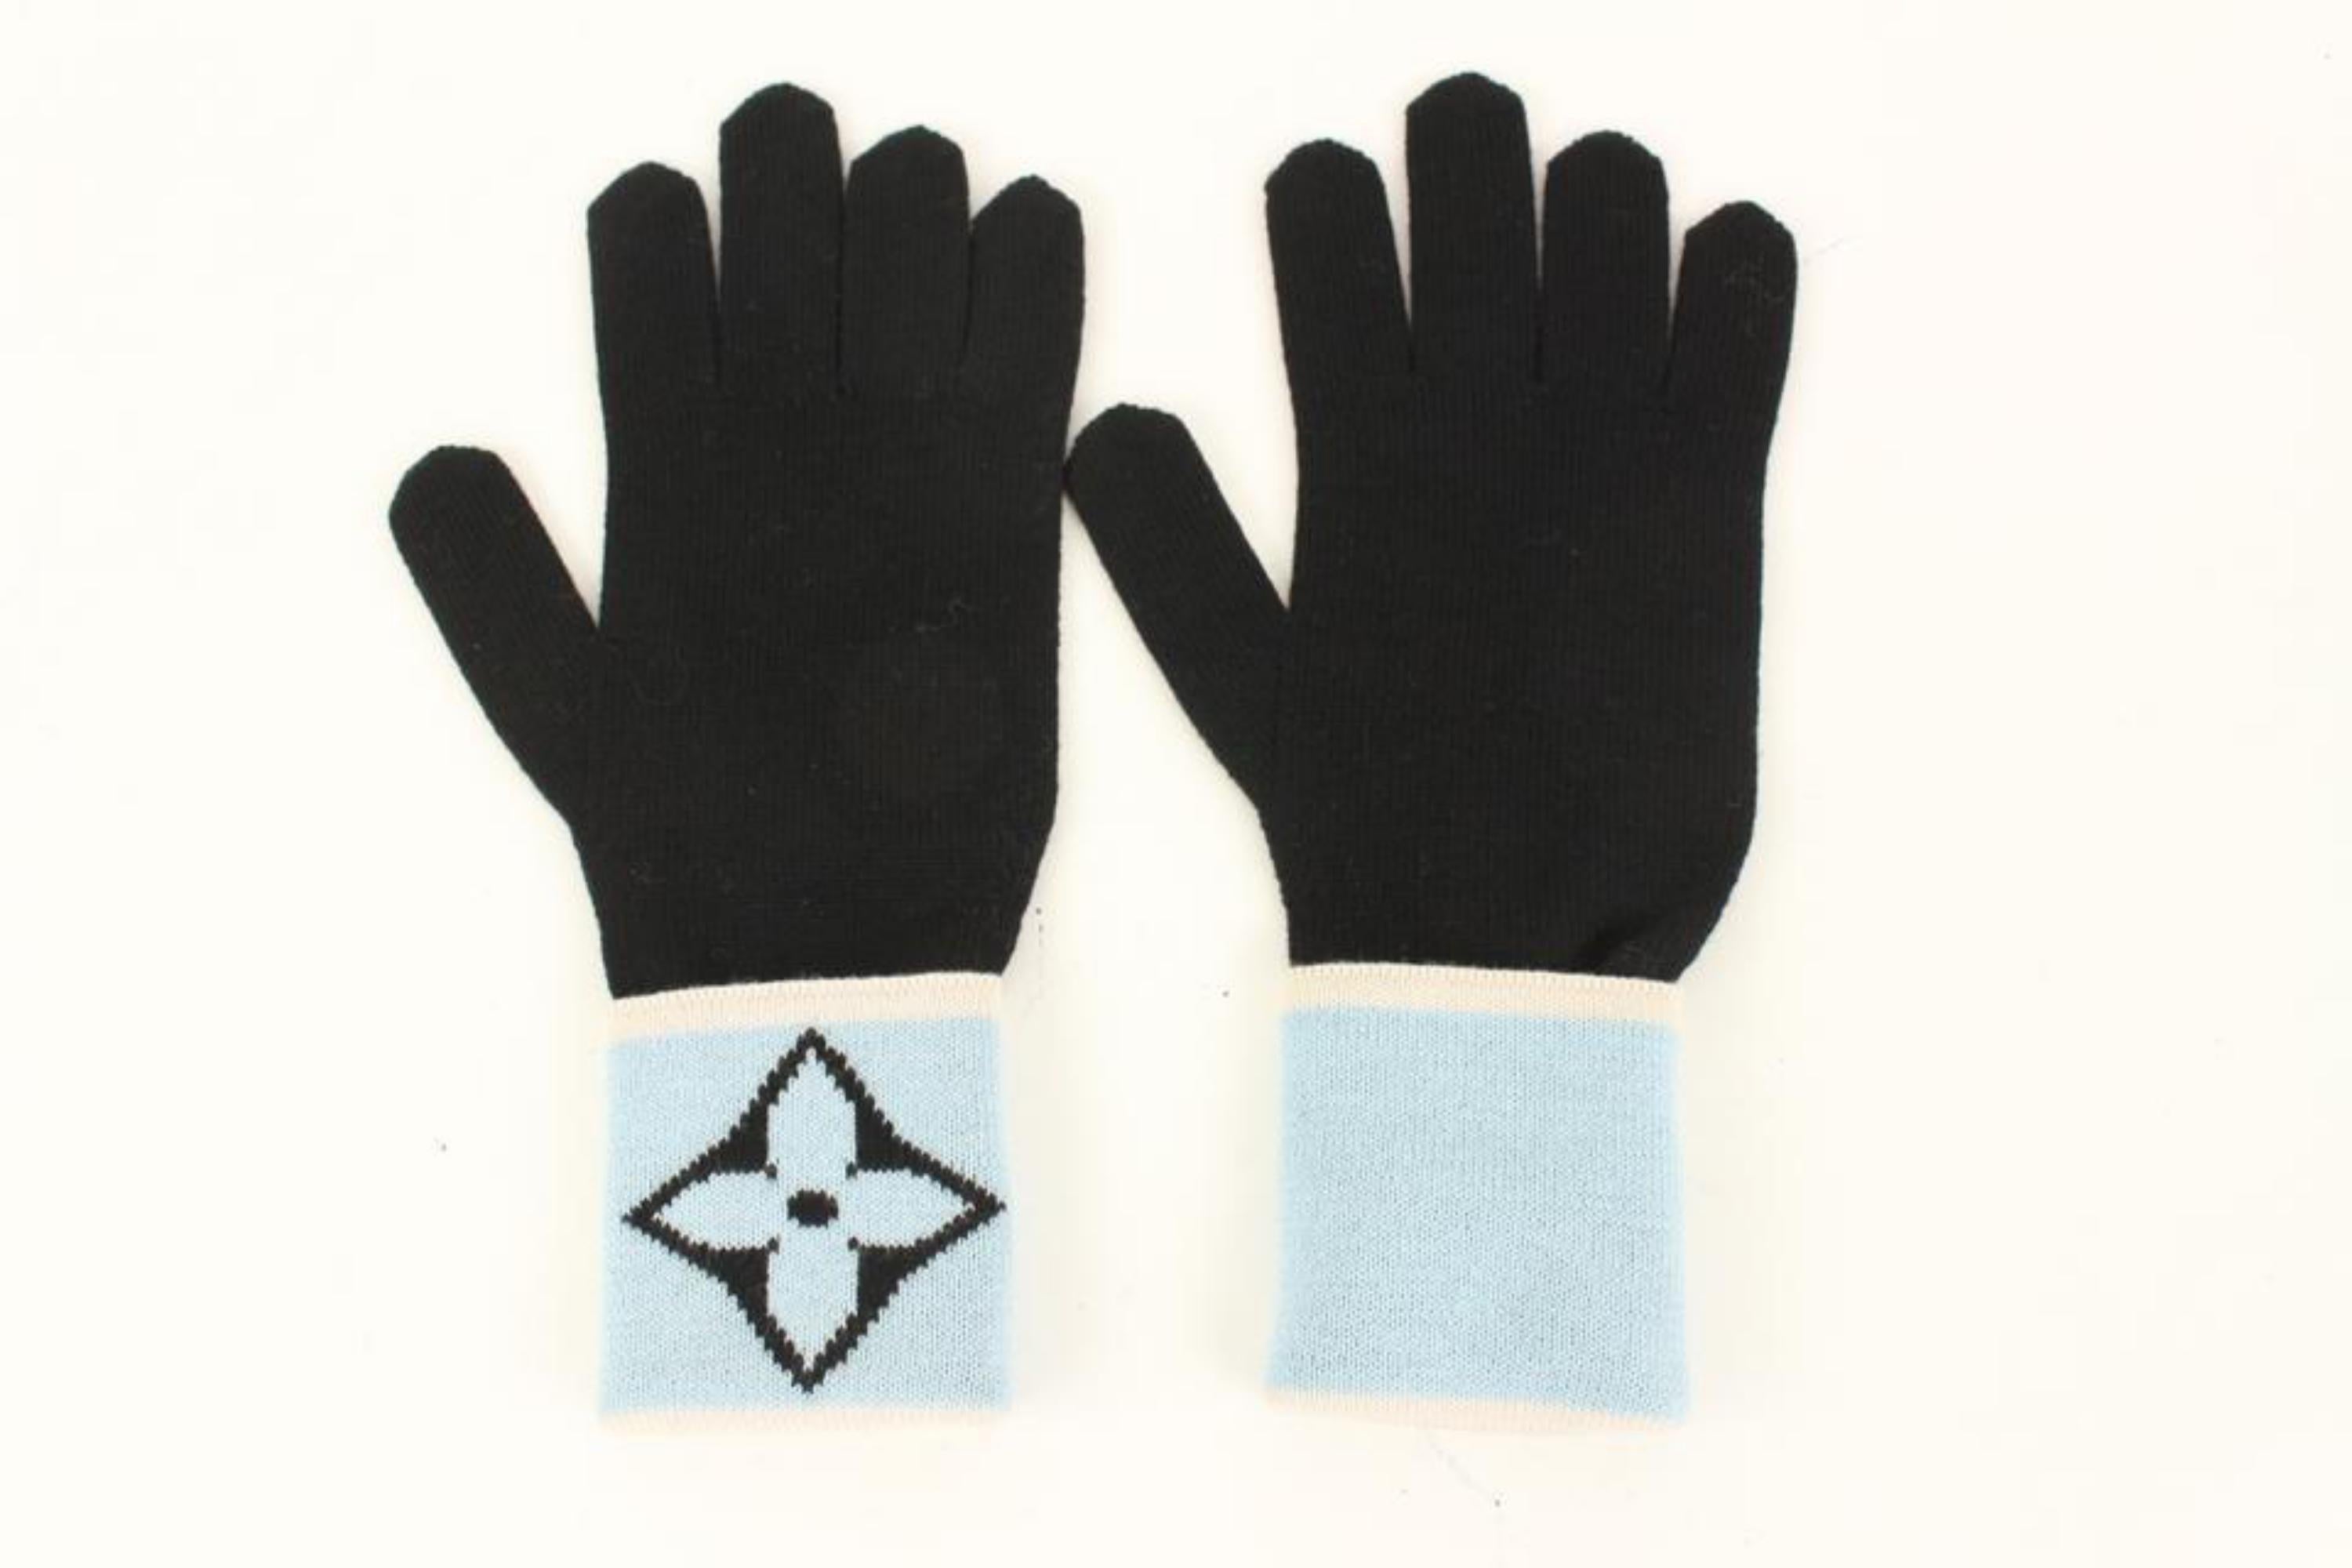 Louis Vuitton Baby Blue x Black Fleur Logo Gloves 49LZ414S
Date Code/Serial Number: MY0136 M70445
Made In: Italy
Measurements: Length:  5.2